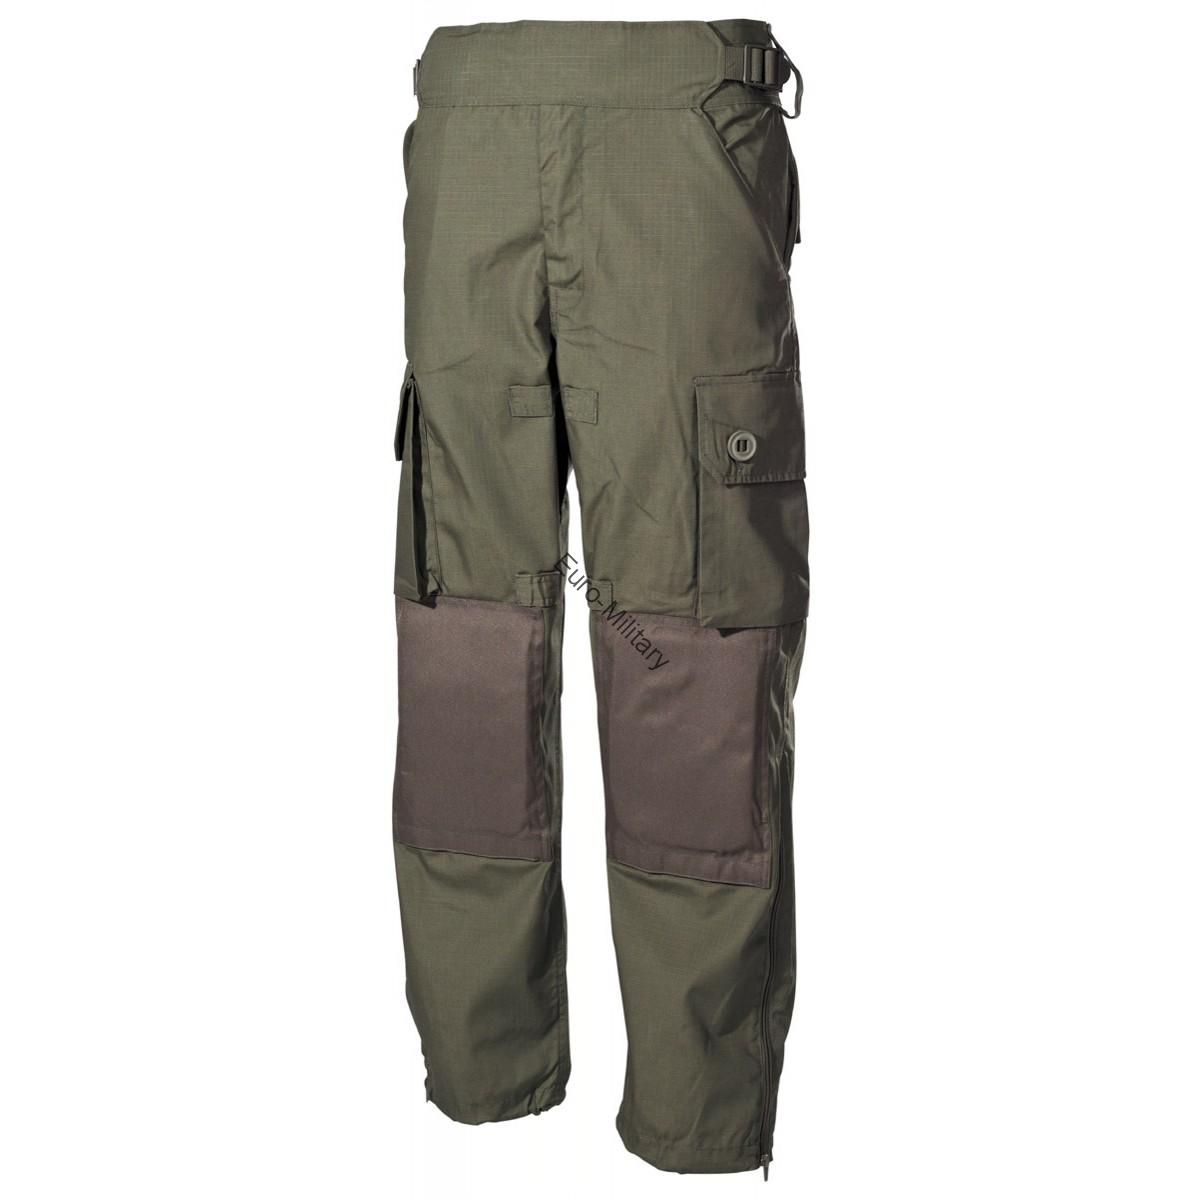 Premium Tactical Military Battle Trousers COMMANDOS - OD Green